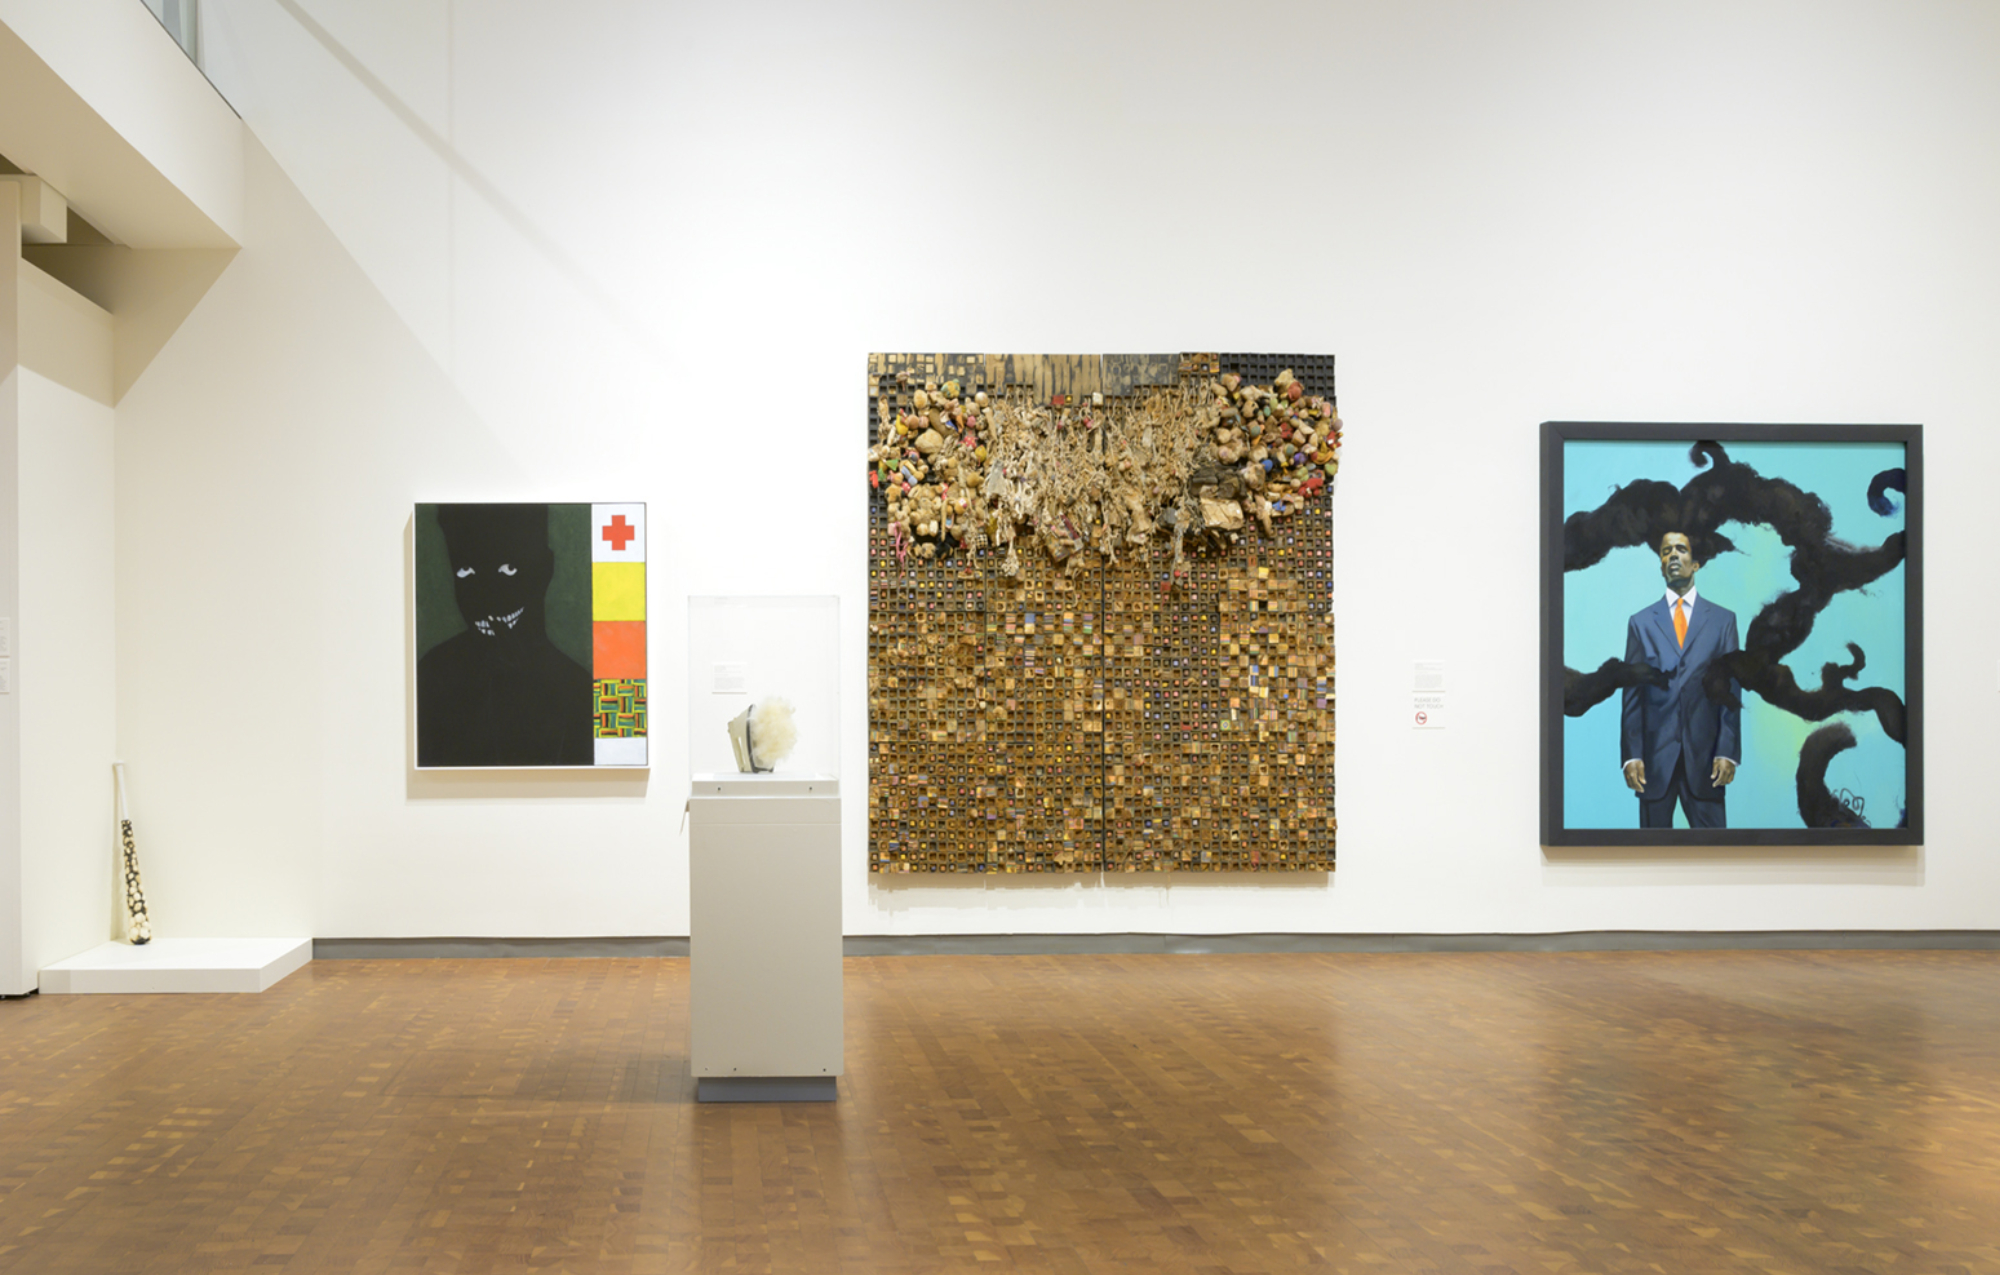 On view in the lower SCMA gallery, from left to right: baseball leaning up against the wall in a corner; painting of a shadowy, toothy-smiling figure next to small squares of color, stripes, and a red cross; an iron emitting soft fabric on a pedestal; a large brown/gold abstract painting made of small squares; a painting of a Black man wearing a blue suit, orange tie standing in front of a blue background with horizontal plumes of black smoke.